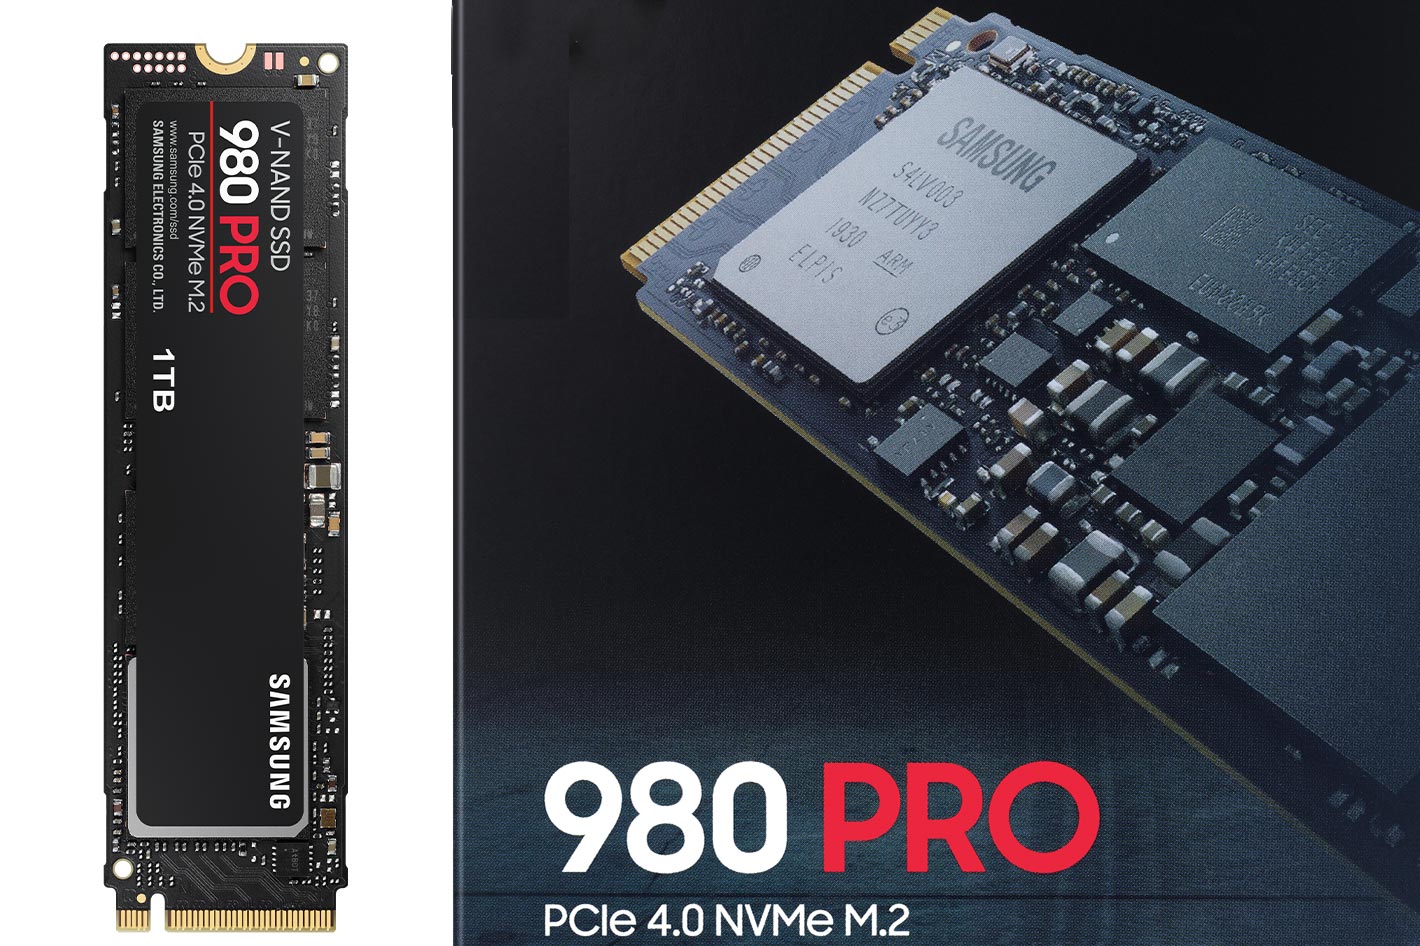 Samsung 980 PRO SSD: first consumer PCIe 4.0 NVMe